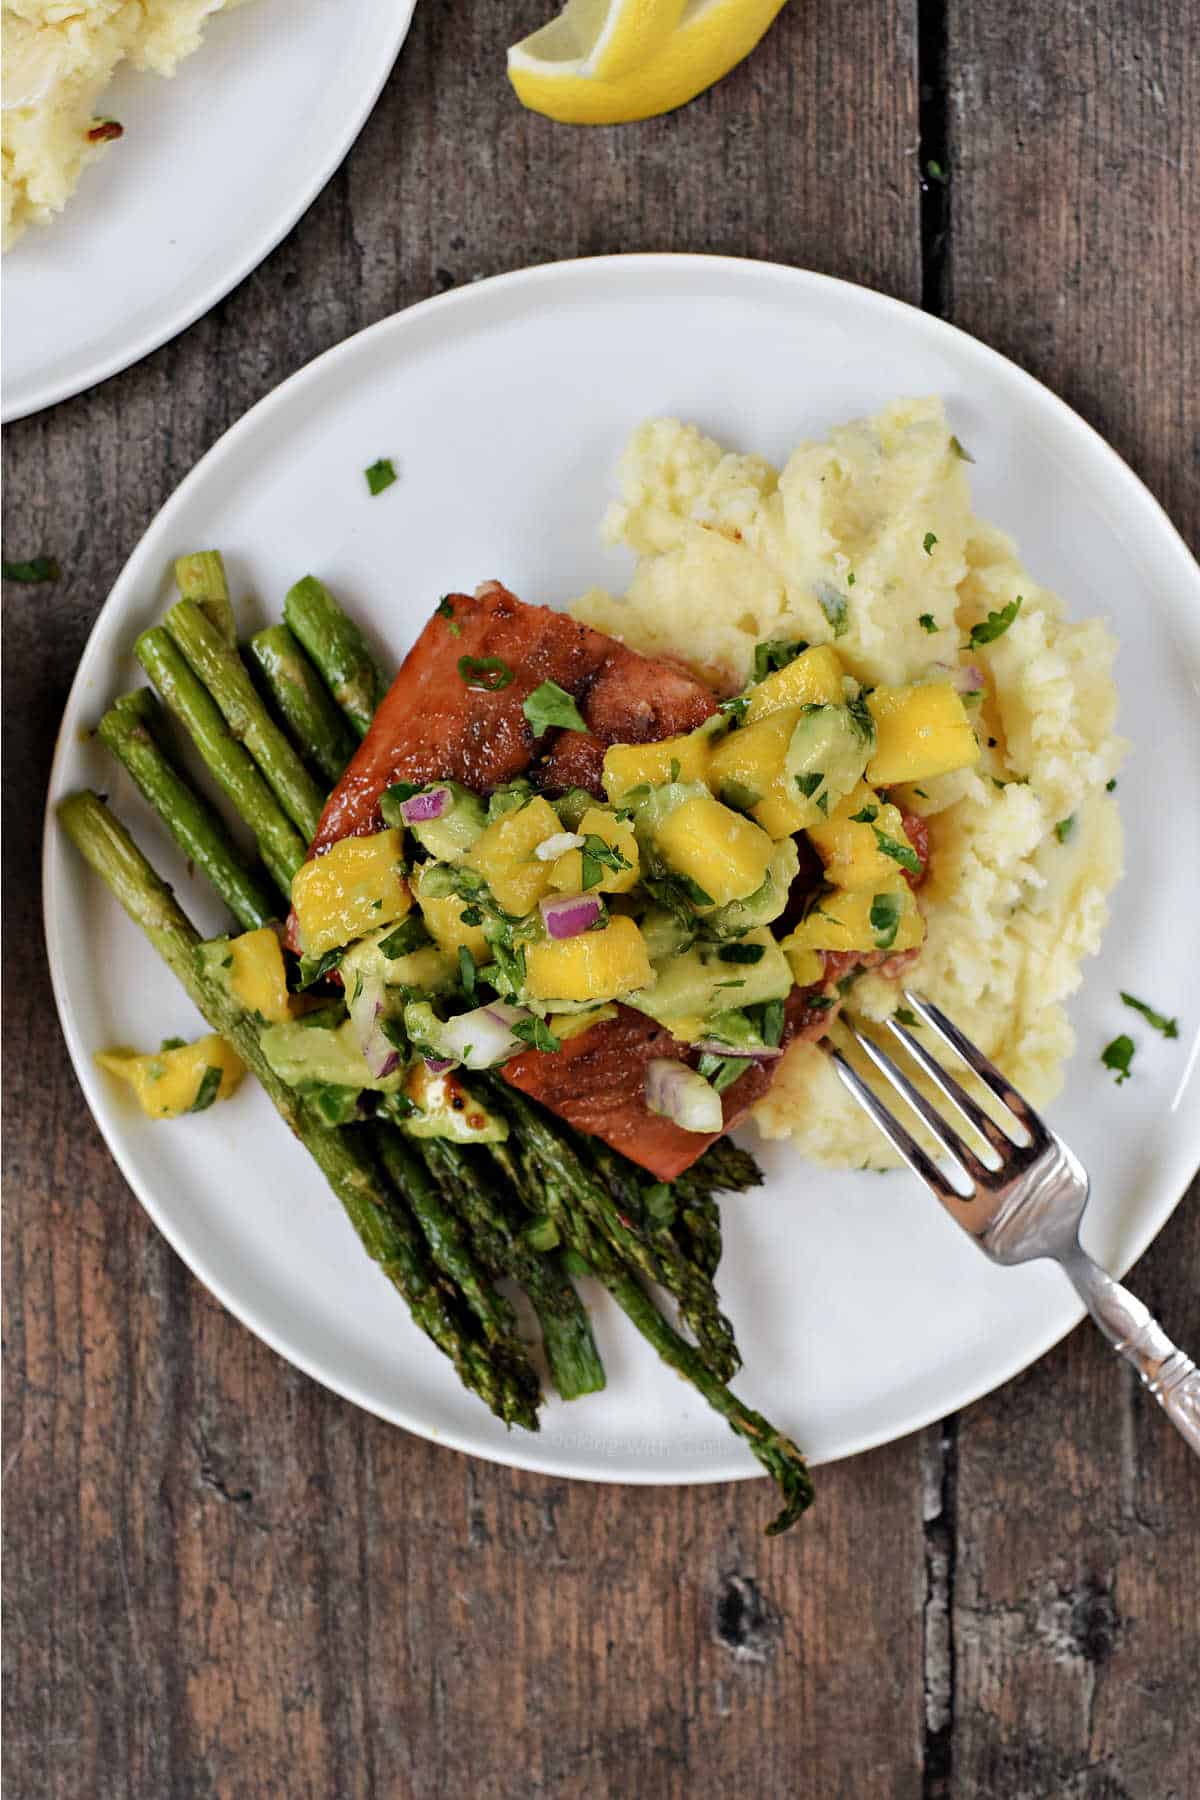 Salmon topped with mango avocado salsa on a bed of mashed potatoes and asparagus spears.